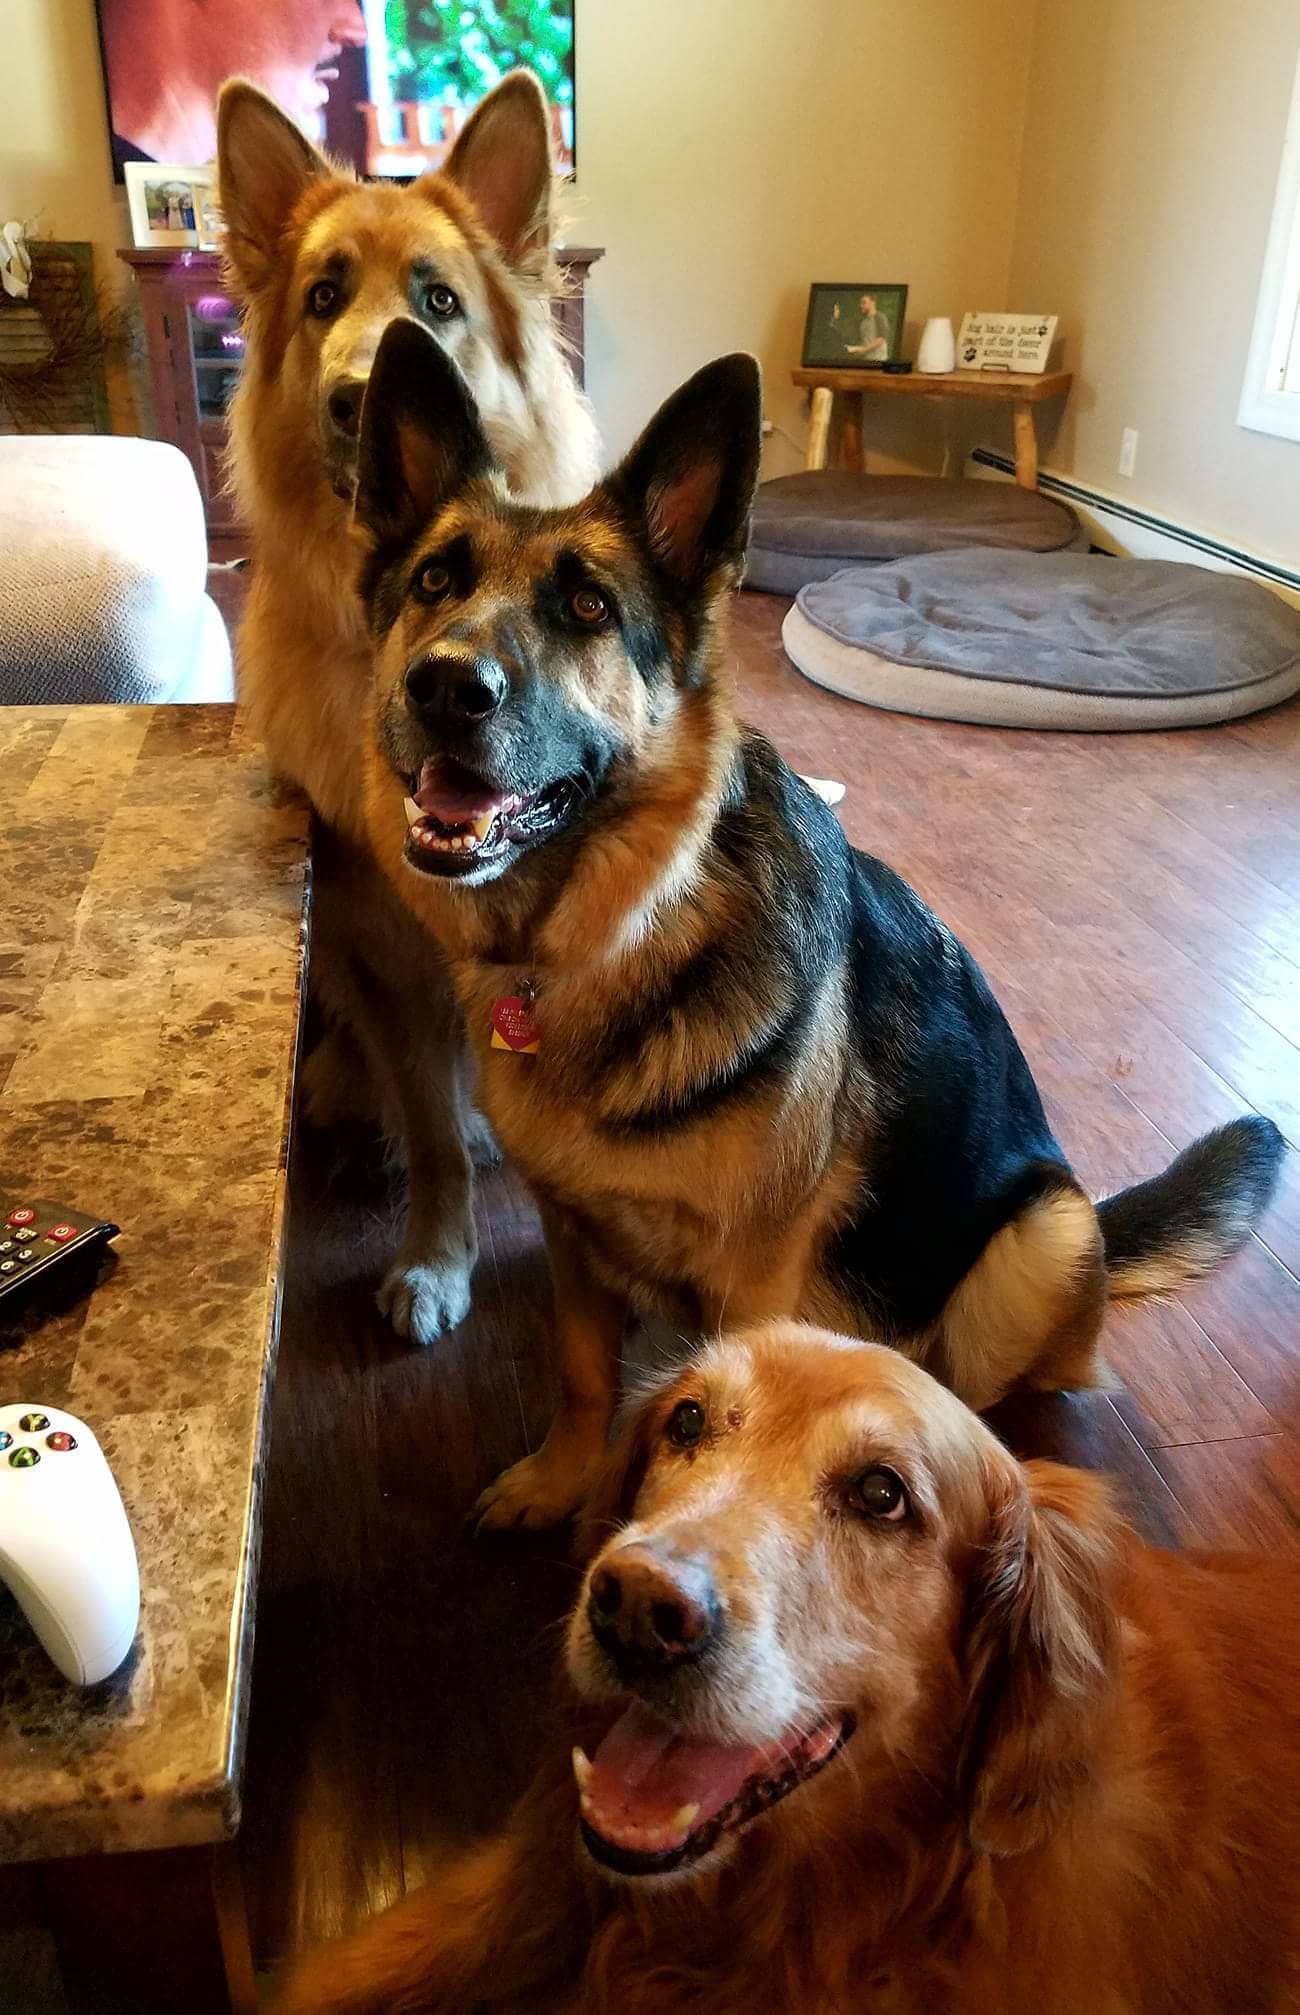 My wife insists she never feeds the dogs human food while I'm over-the-road, but these faces say otherwise